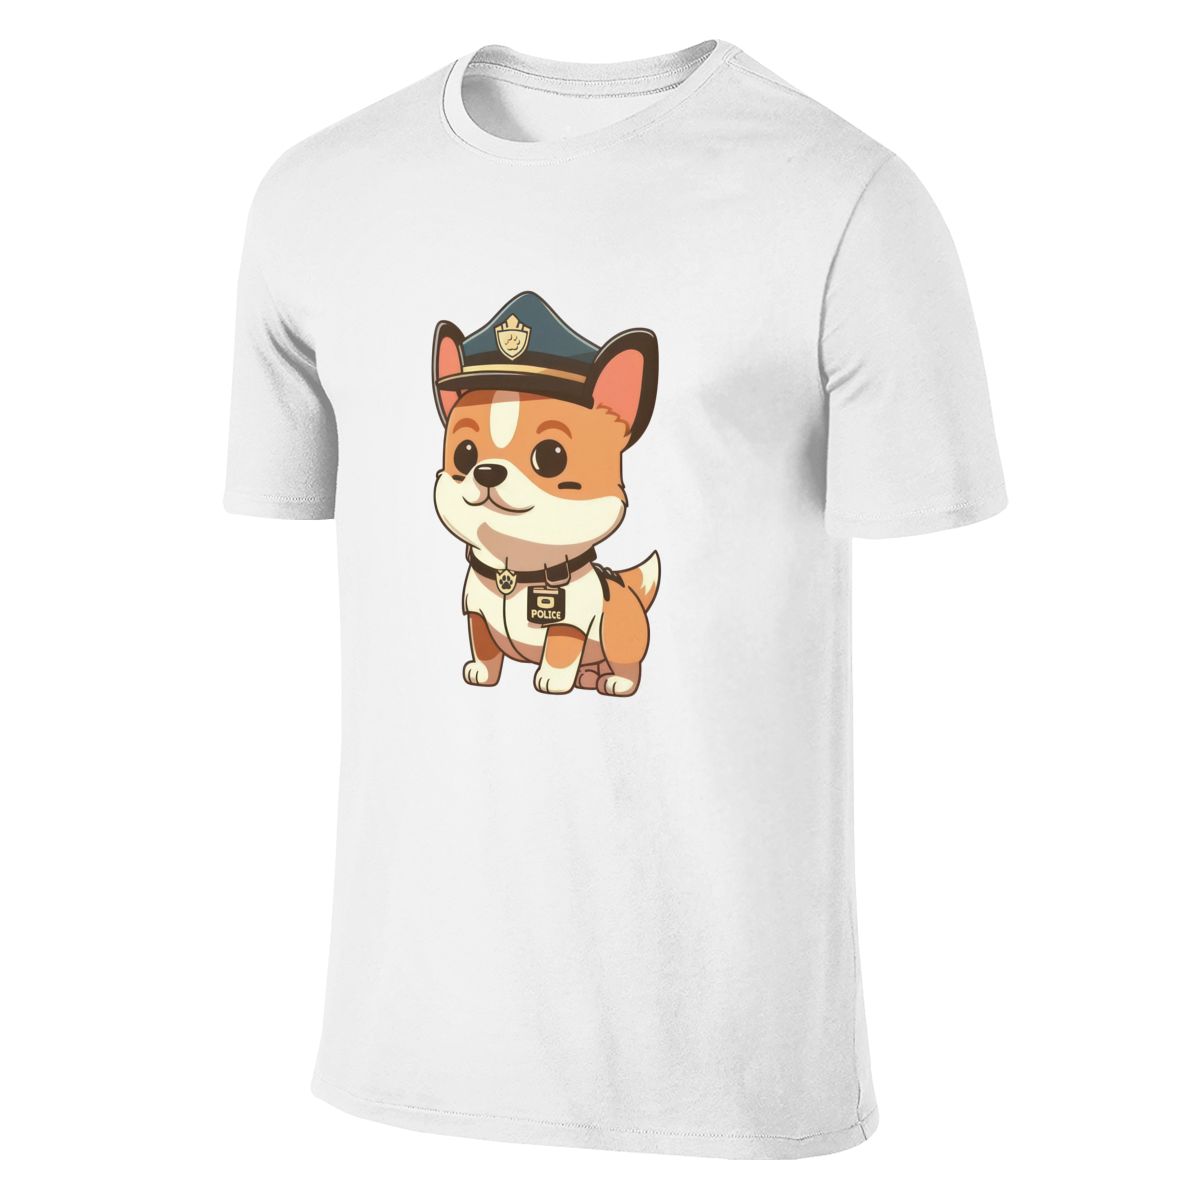 Puppy Police T-Shirt - Cooper